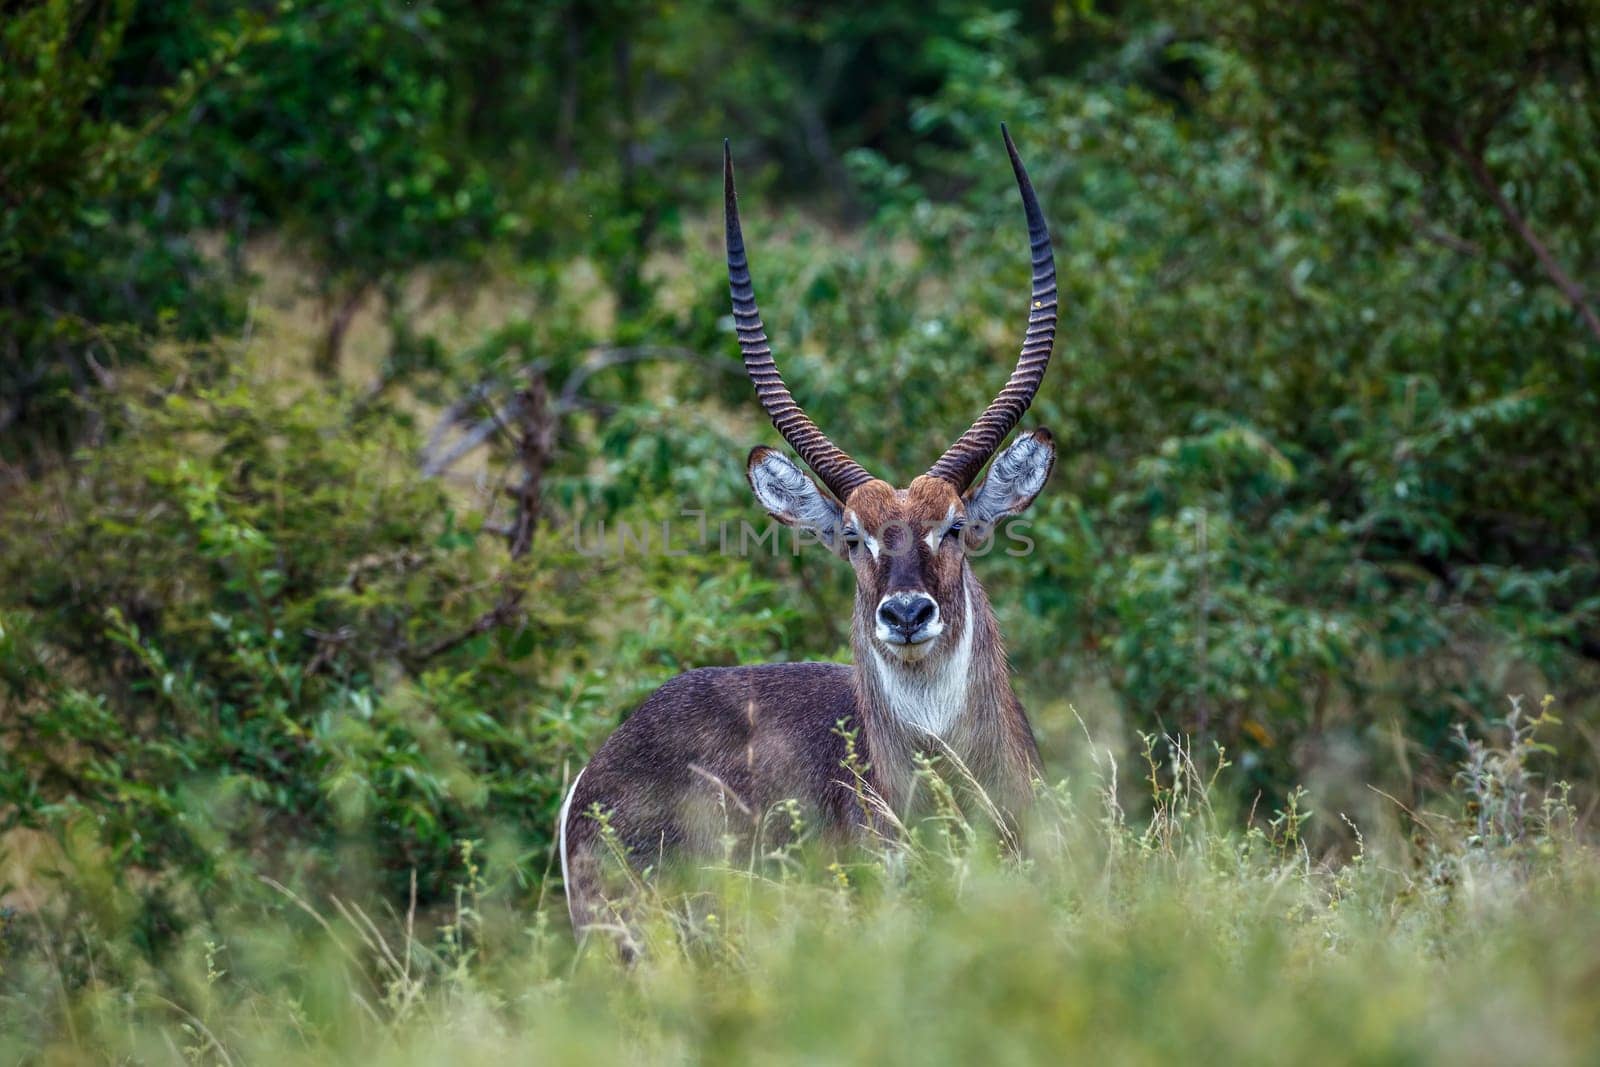 Common waterbuck in Kruger national park, South Africa by PACOCOMO